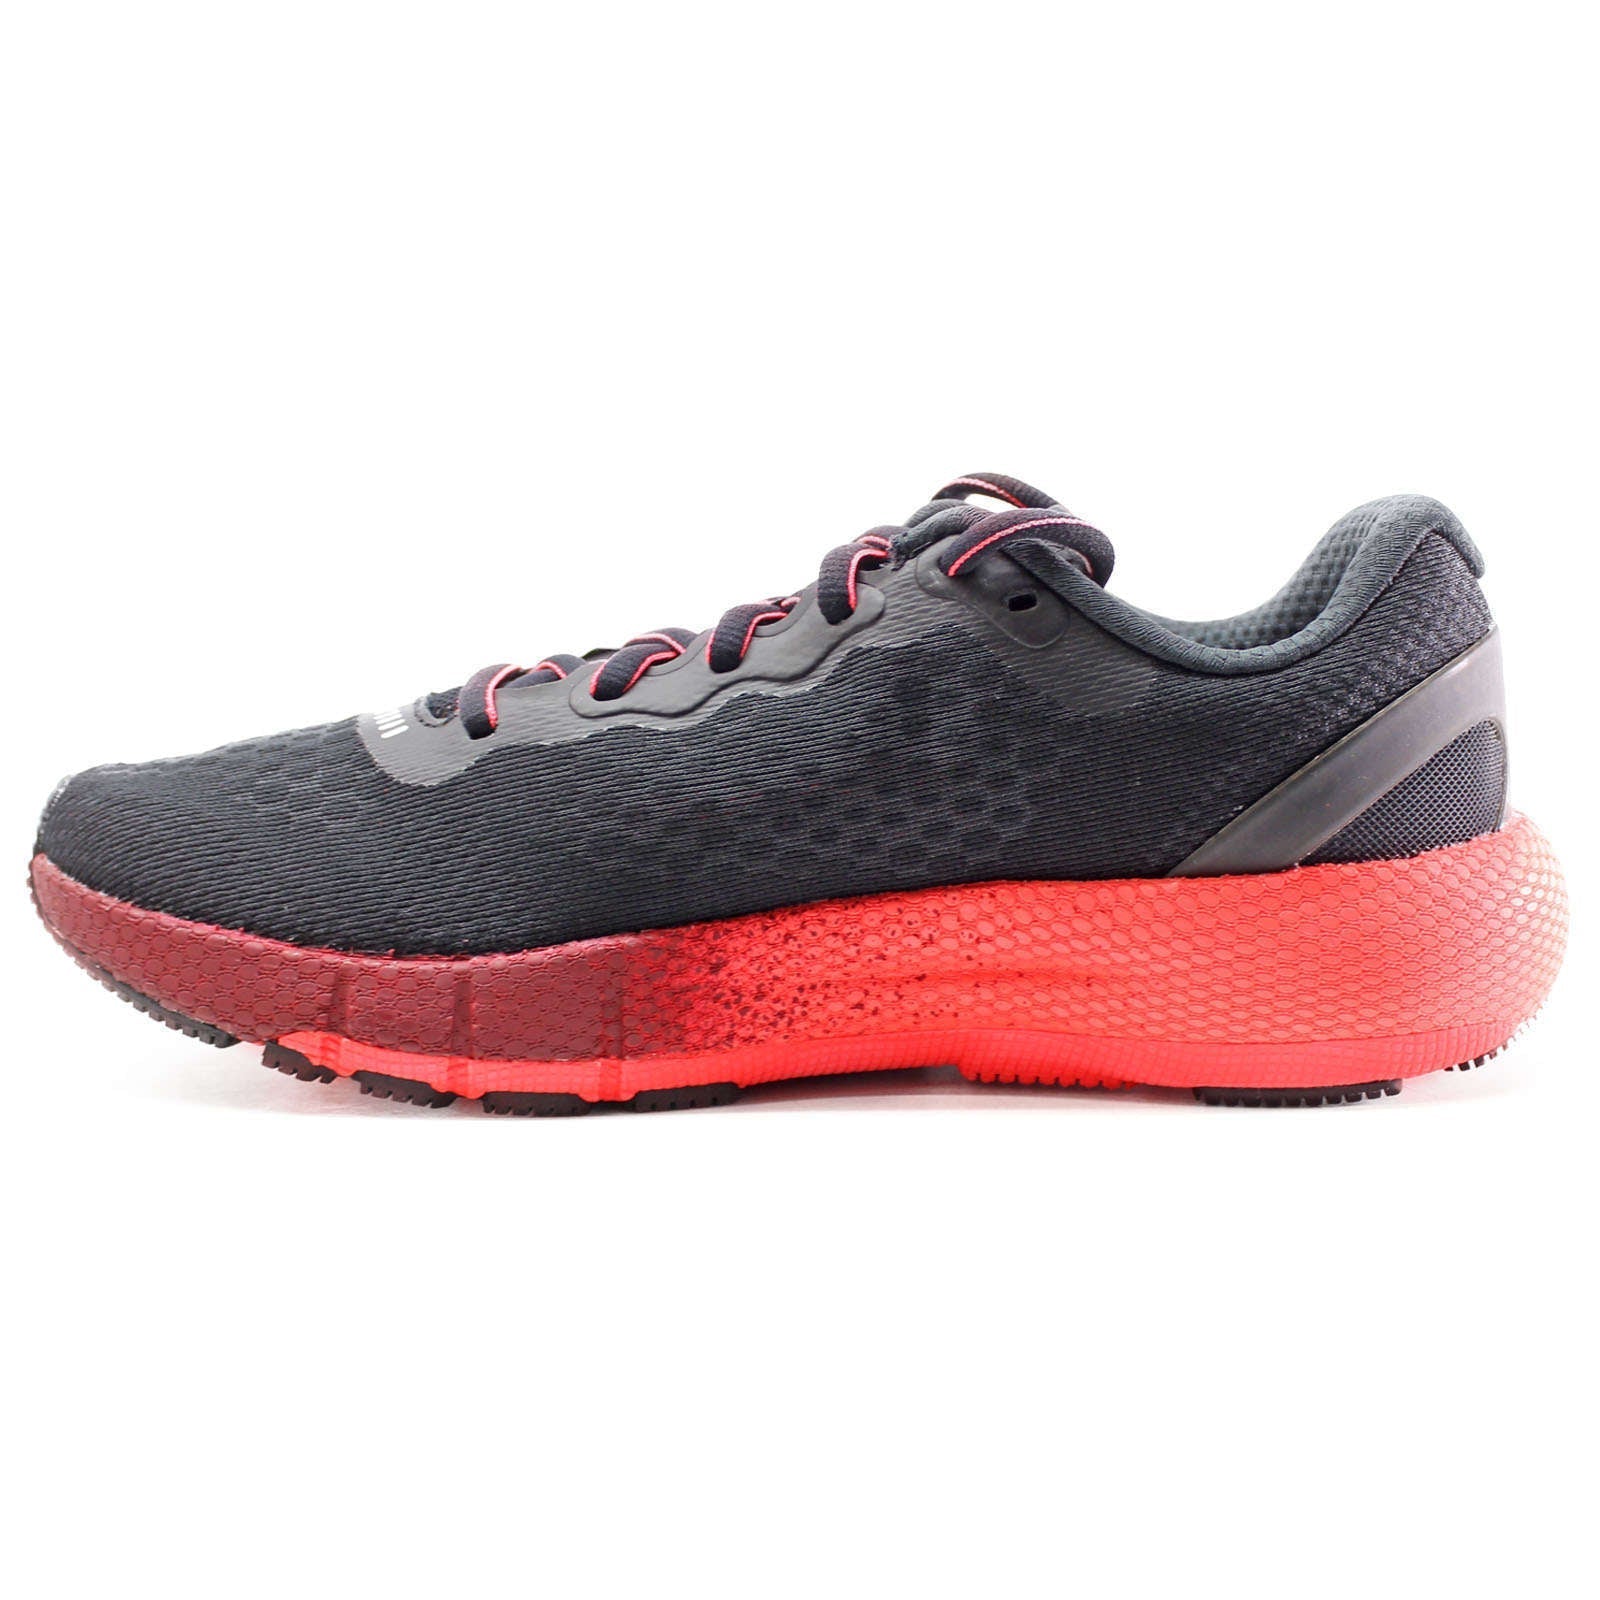 Under Armour HOVR Machina 2 CLRSHFT Synthetic Textile Women's Low-Top Sneakers#color_black red